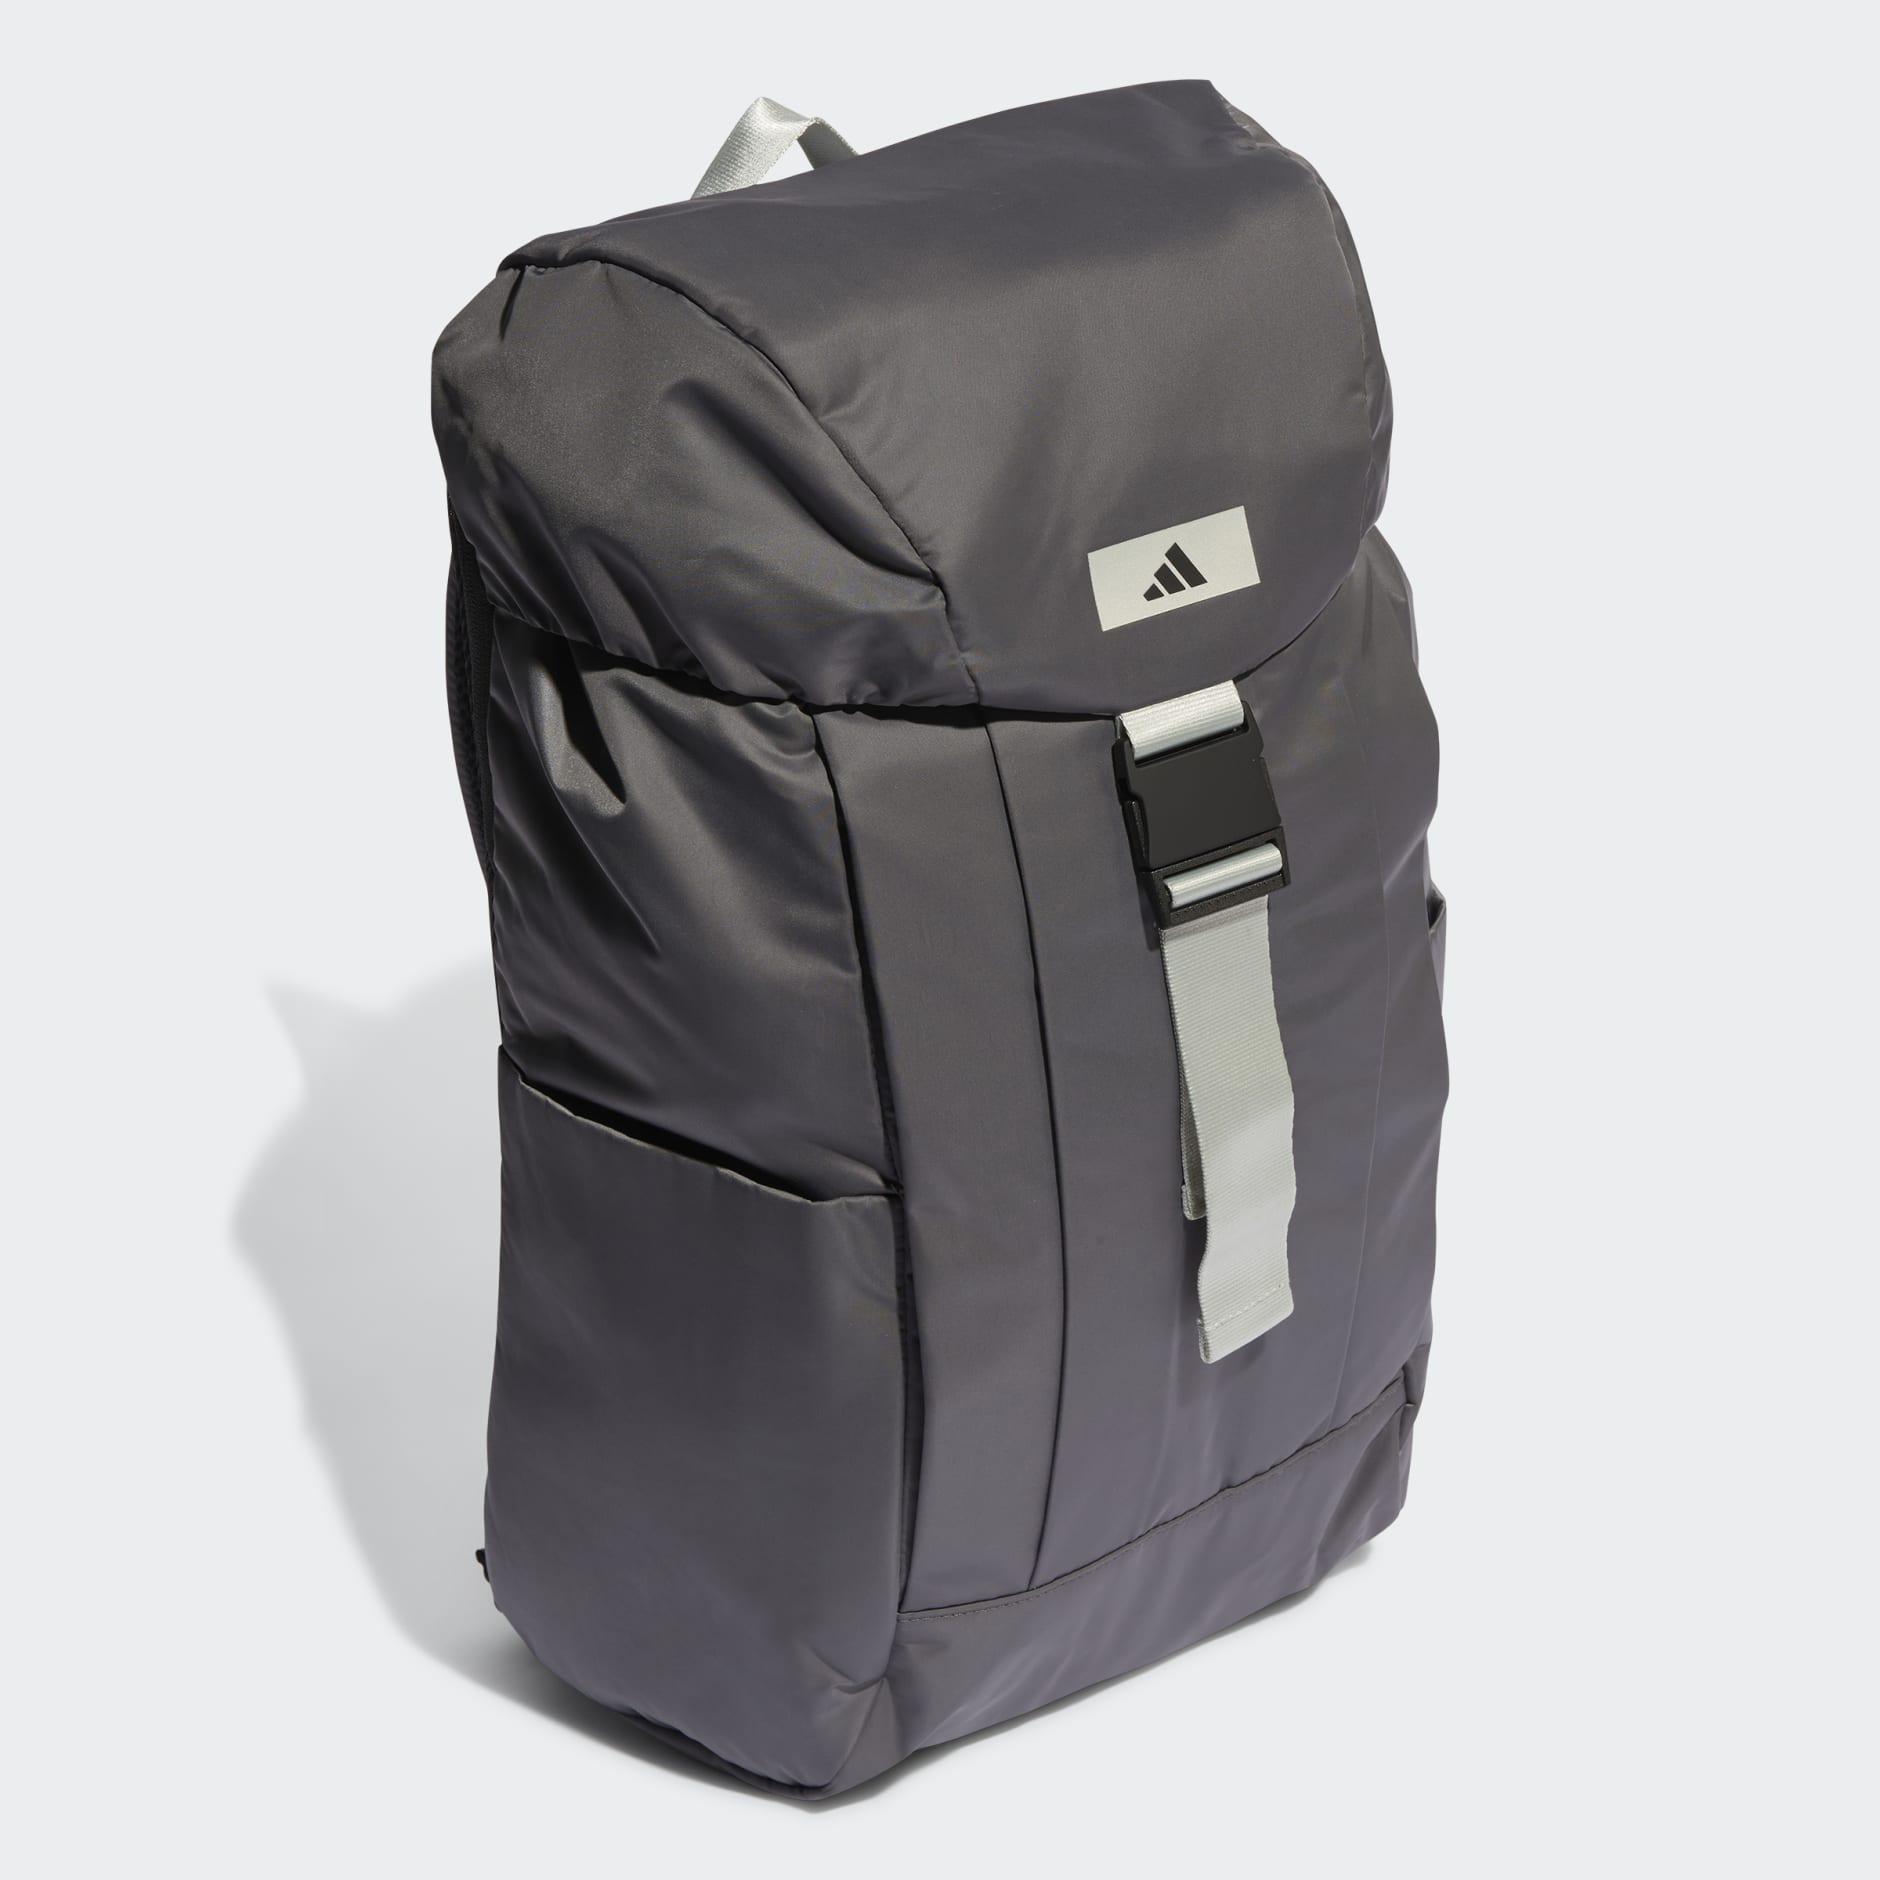 Accessories - Gym High-Intensity Backpack - Grey | adidas South Africa